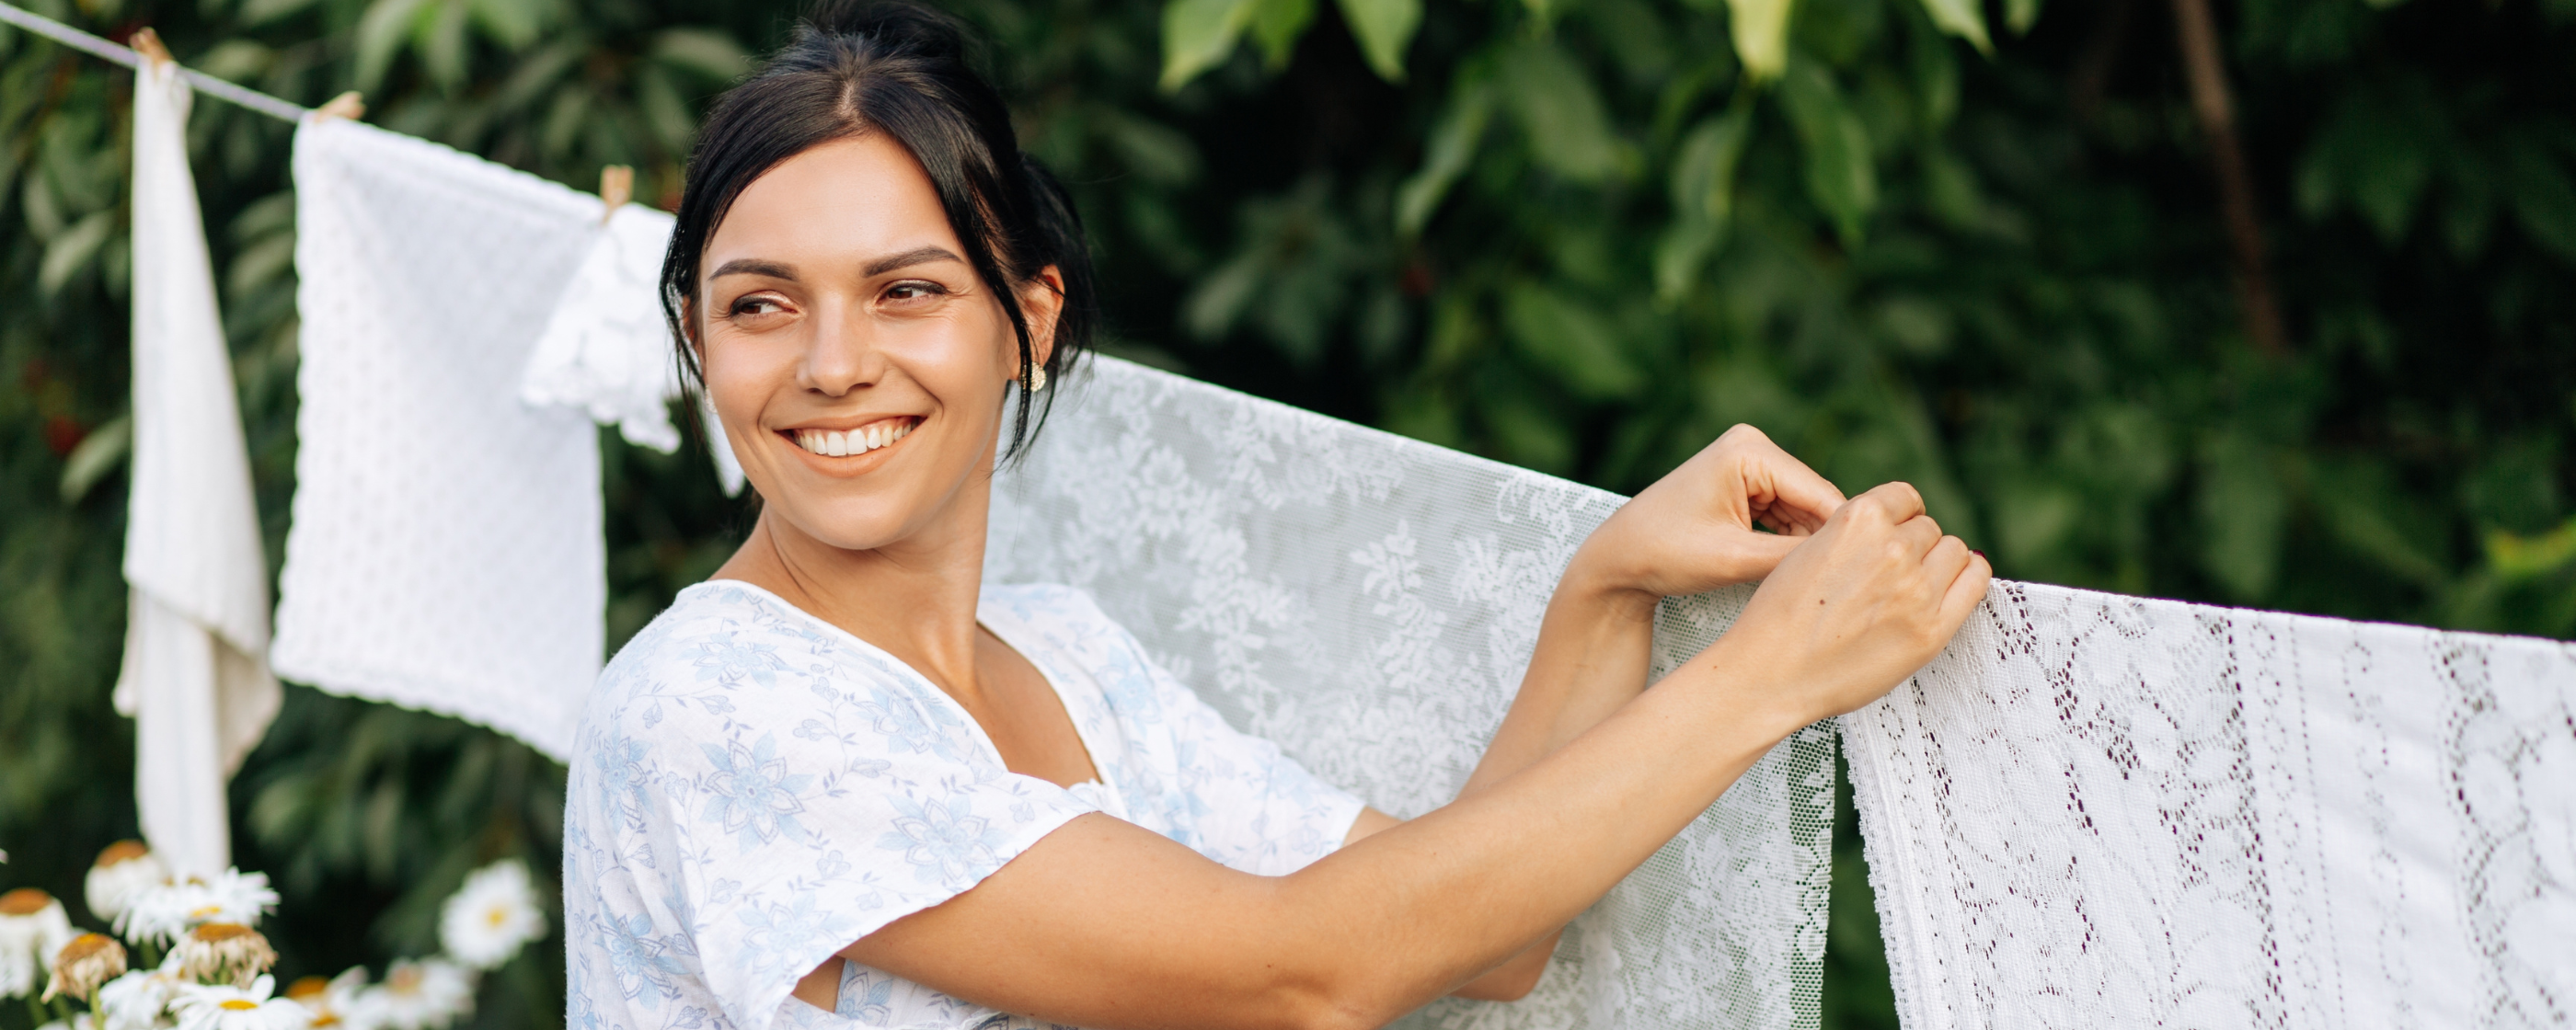 A smiling woman hanging laundry outdoors.